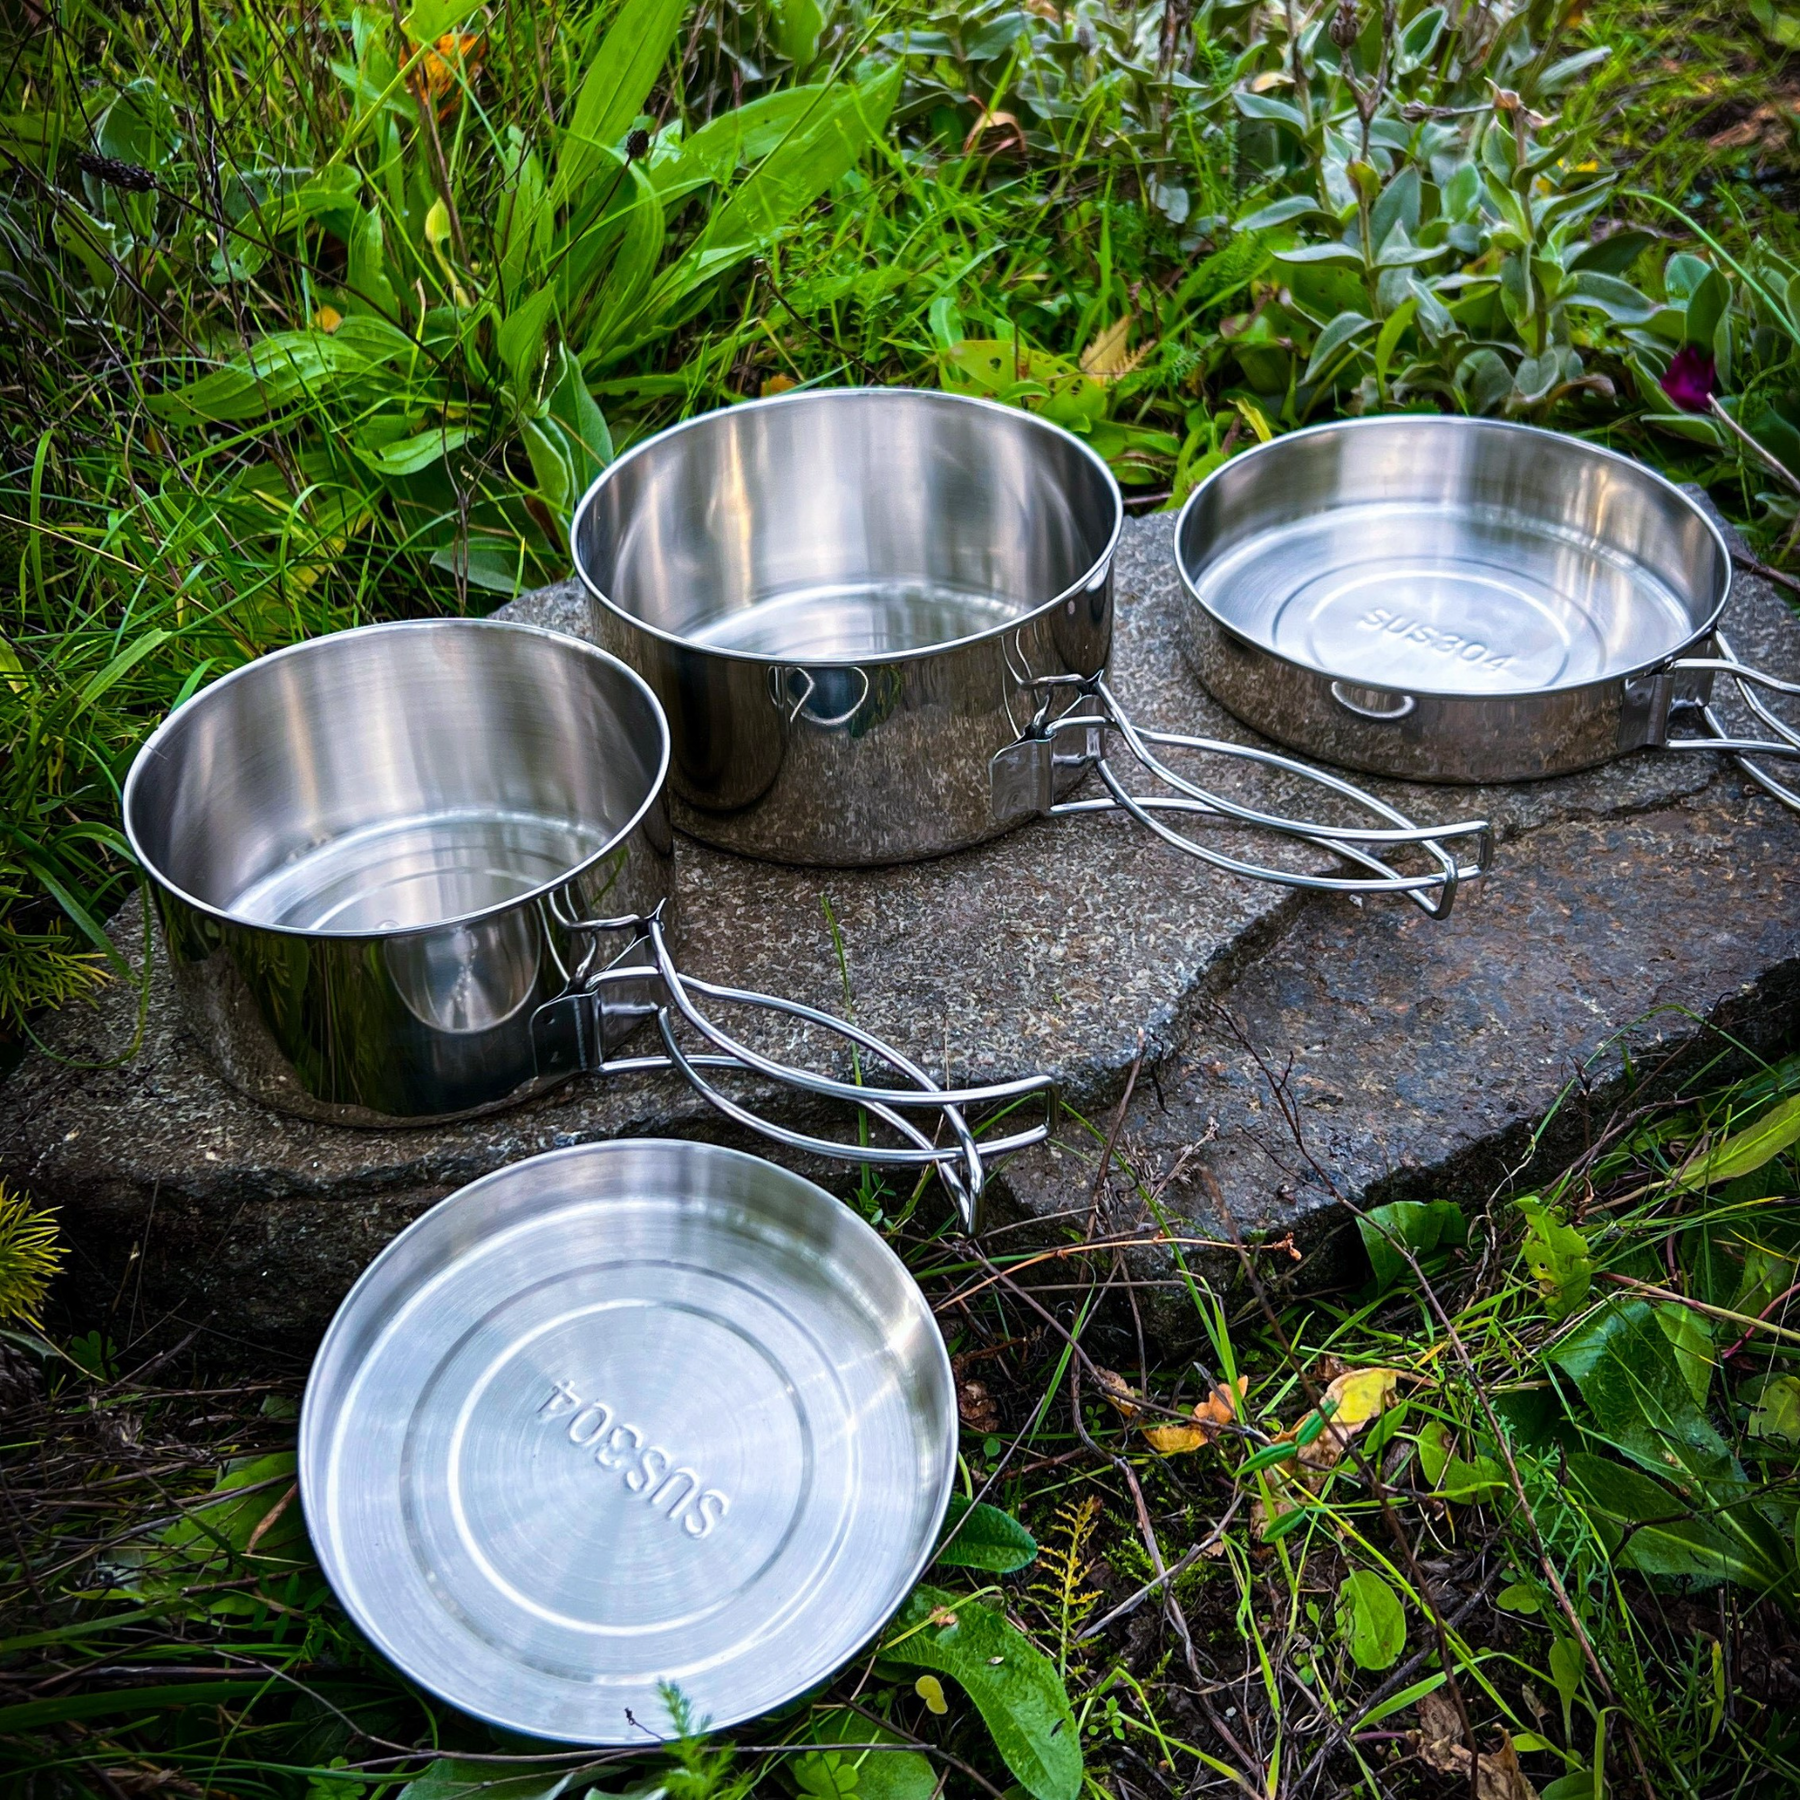 304 Stainless Steel Portable Pots & Pans Set - Perfect For Outdoor